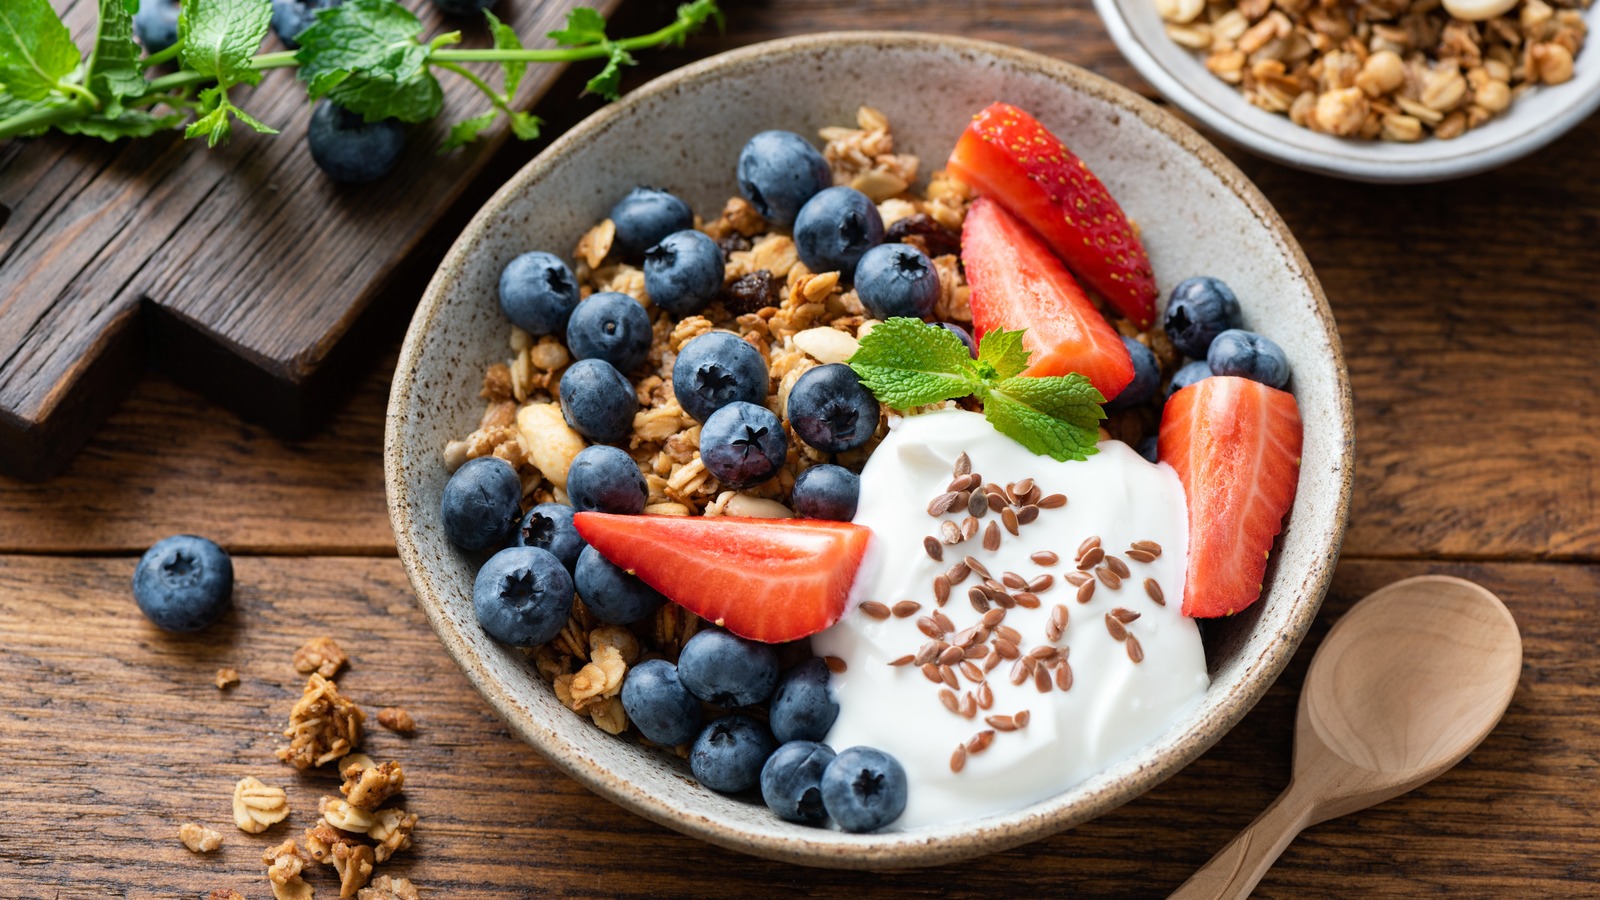 Is There A Difference Between Straggisto And Greek Yogurt?